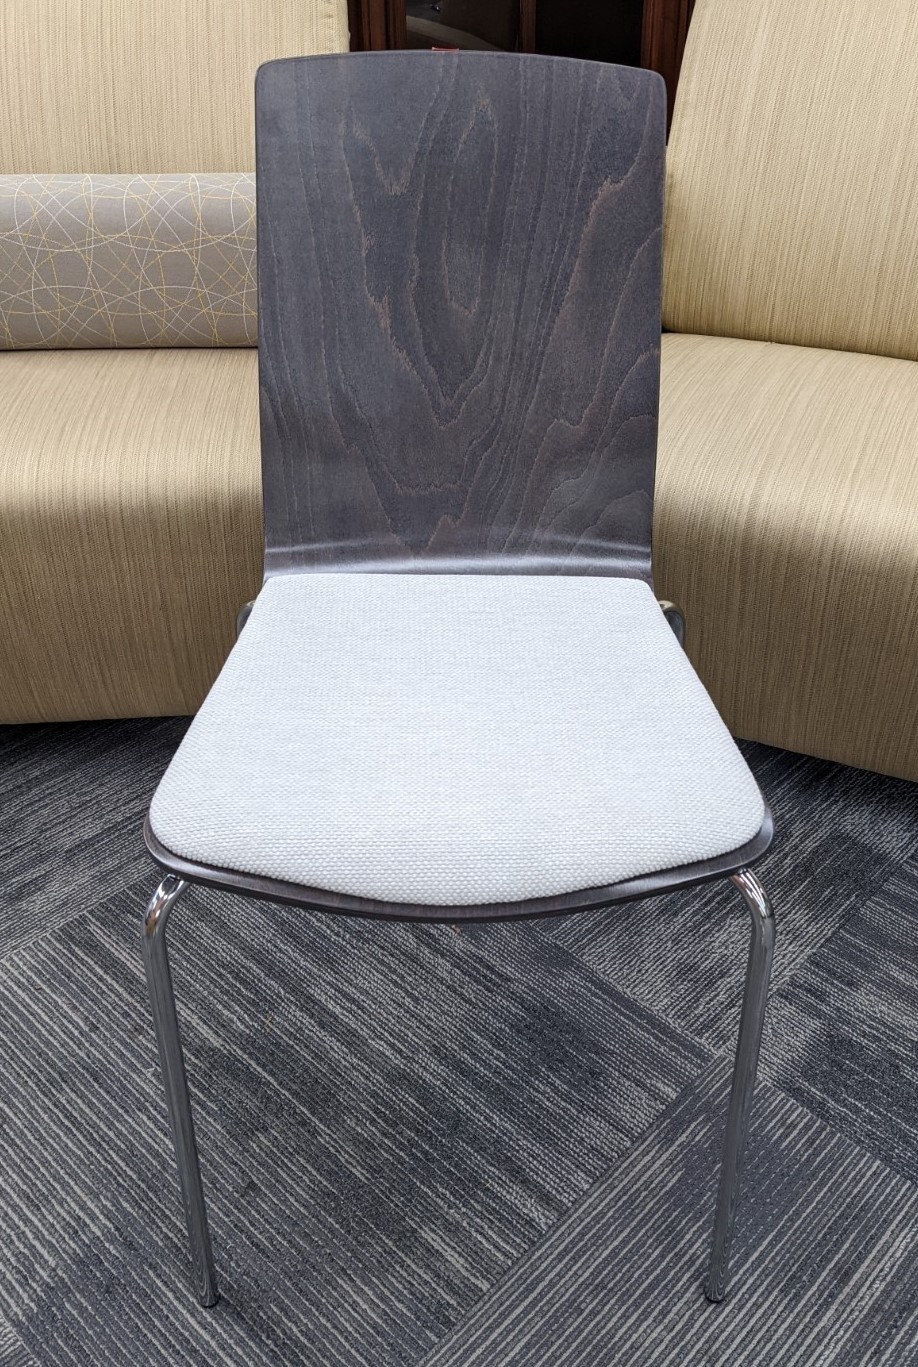 Closeout Sas™ Wood Chair by Global Furniture Group